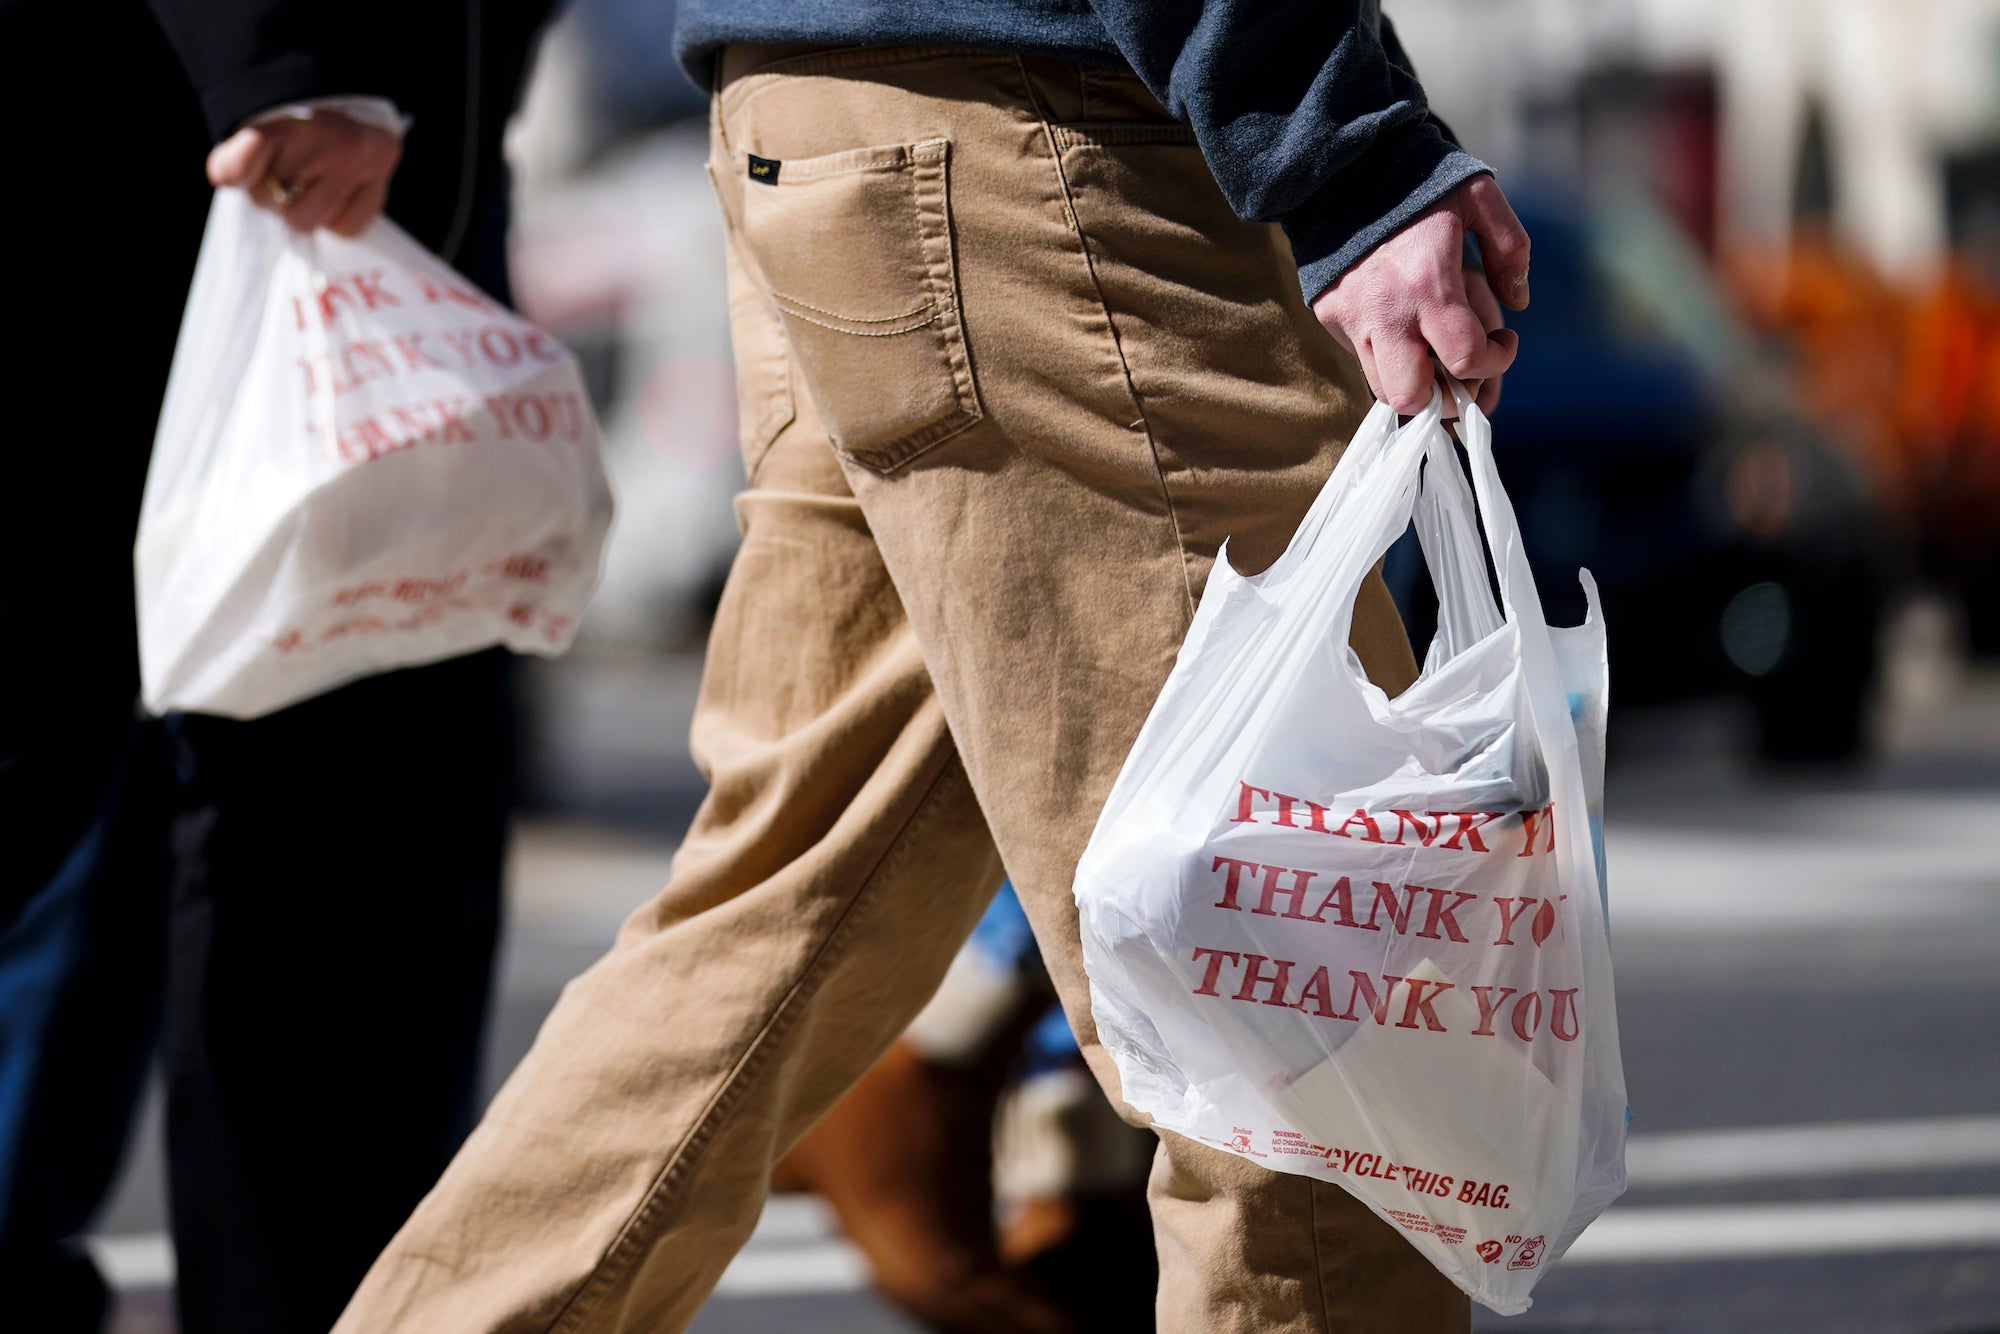 First day of plastic bag ban in Pittsburgh 'no big deal' for most